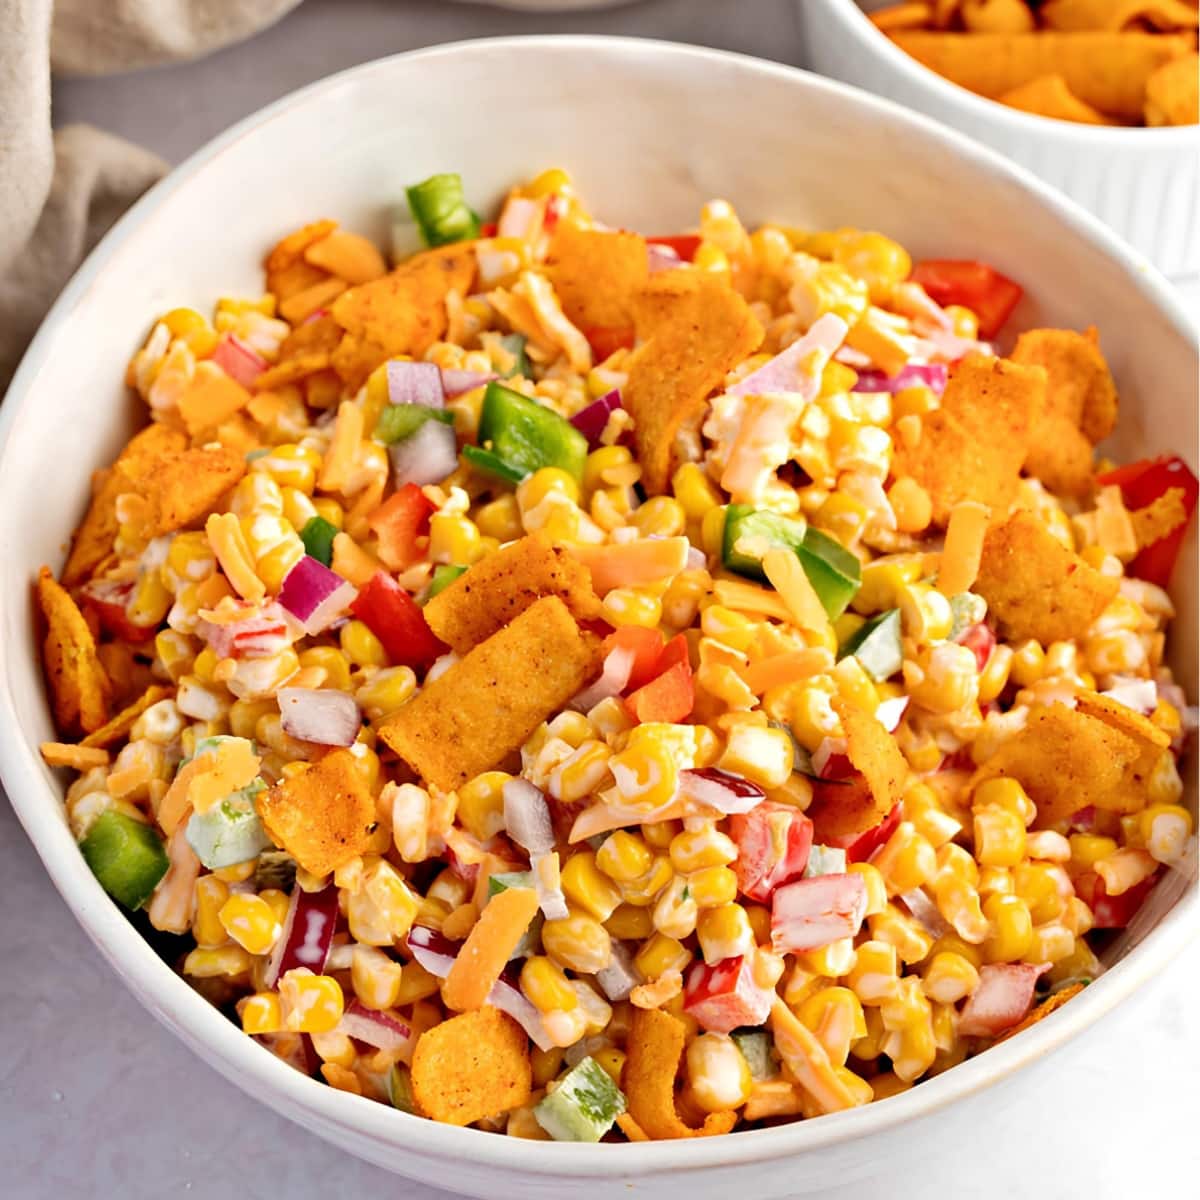 A bowl of corn salad with chips and corn, a refreshing and crunchy dish perfect for a light meal or snack